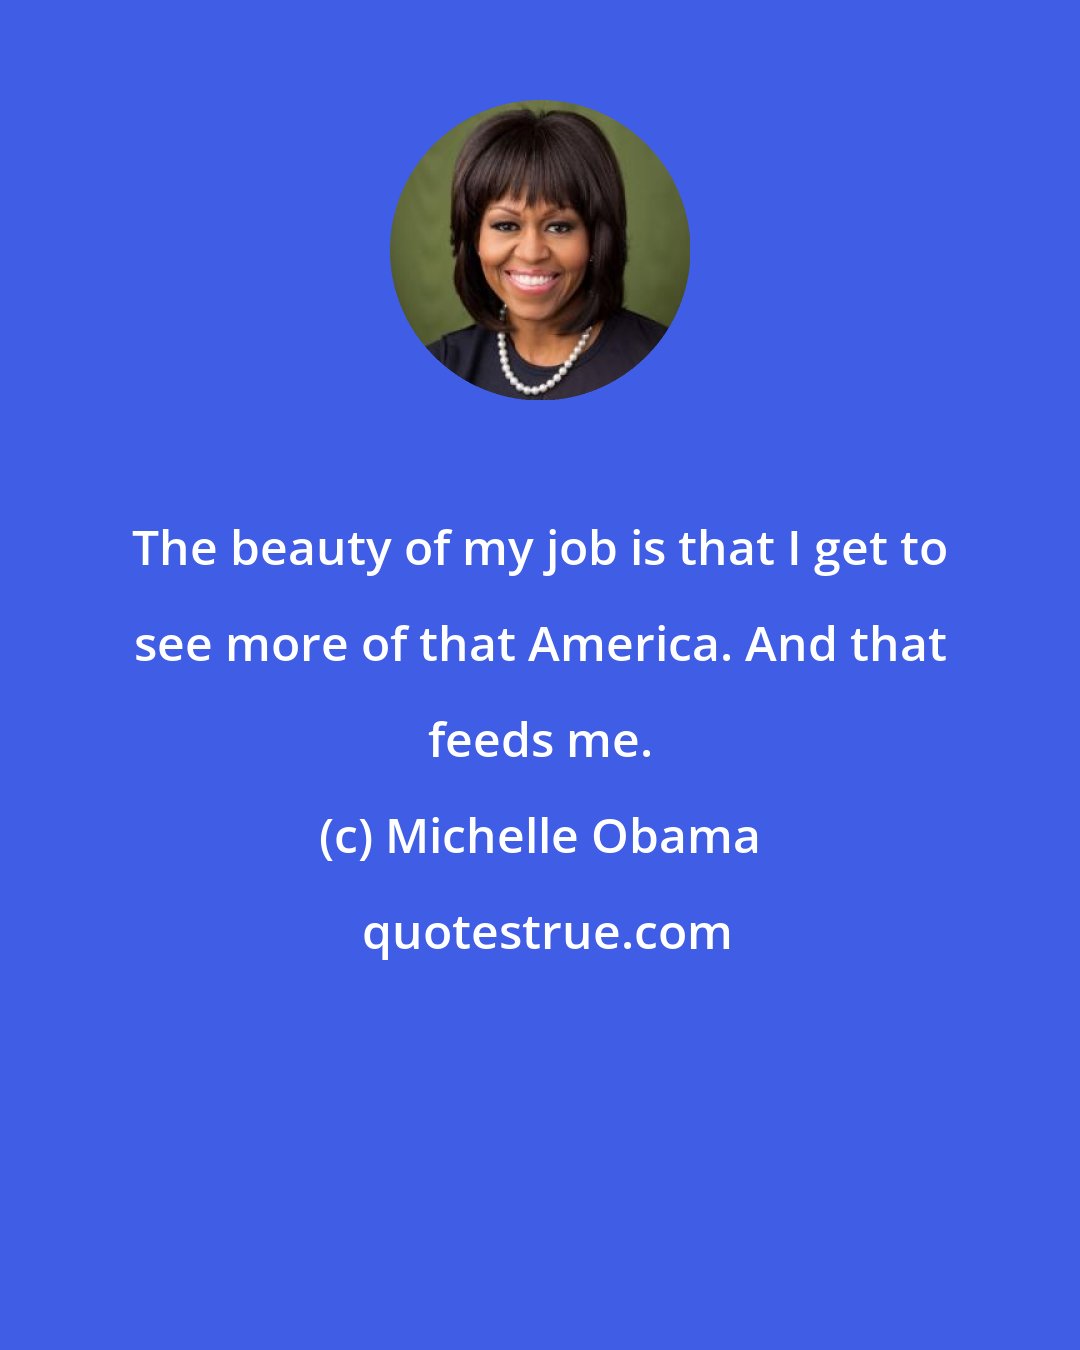 Michelle Obama: The beauty of my job is that I get to see more of that America. And that feeds me.